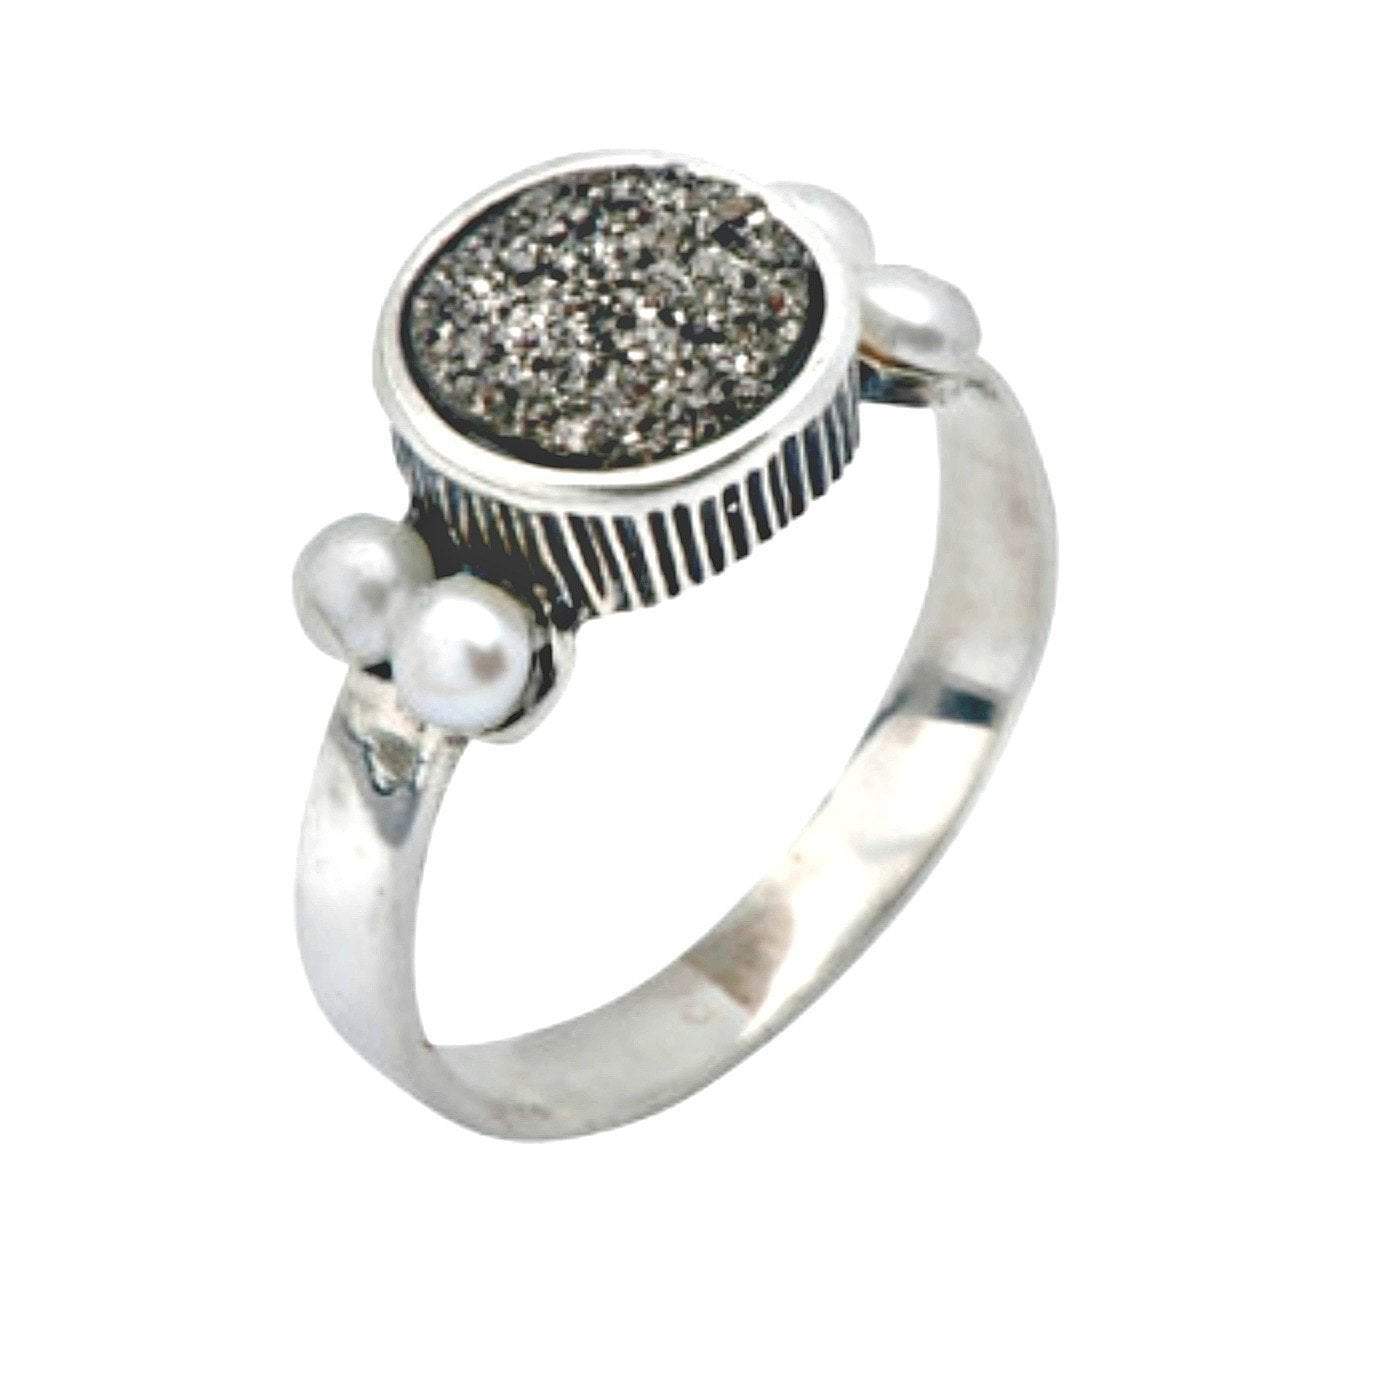 Bluenoemi Jewelry Rings Silver Ring. 925 Sterling  Silver ring set with a druzy quartz stone and pearls